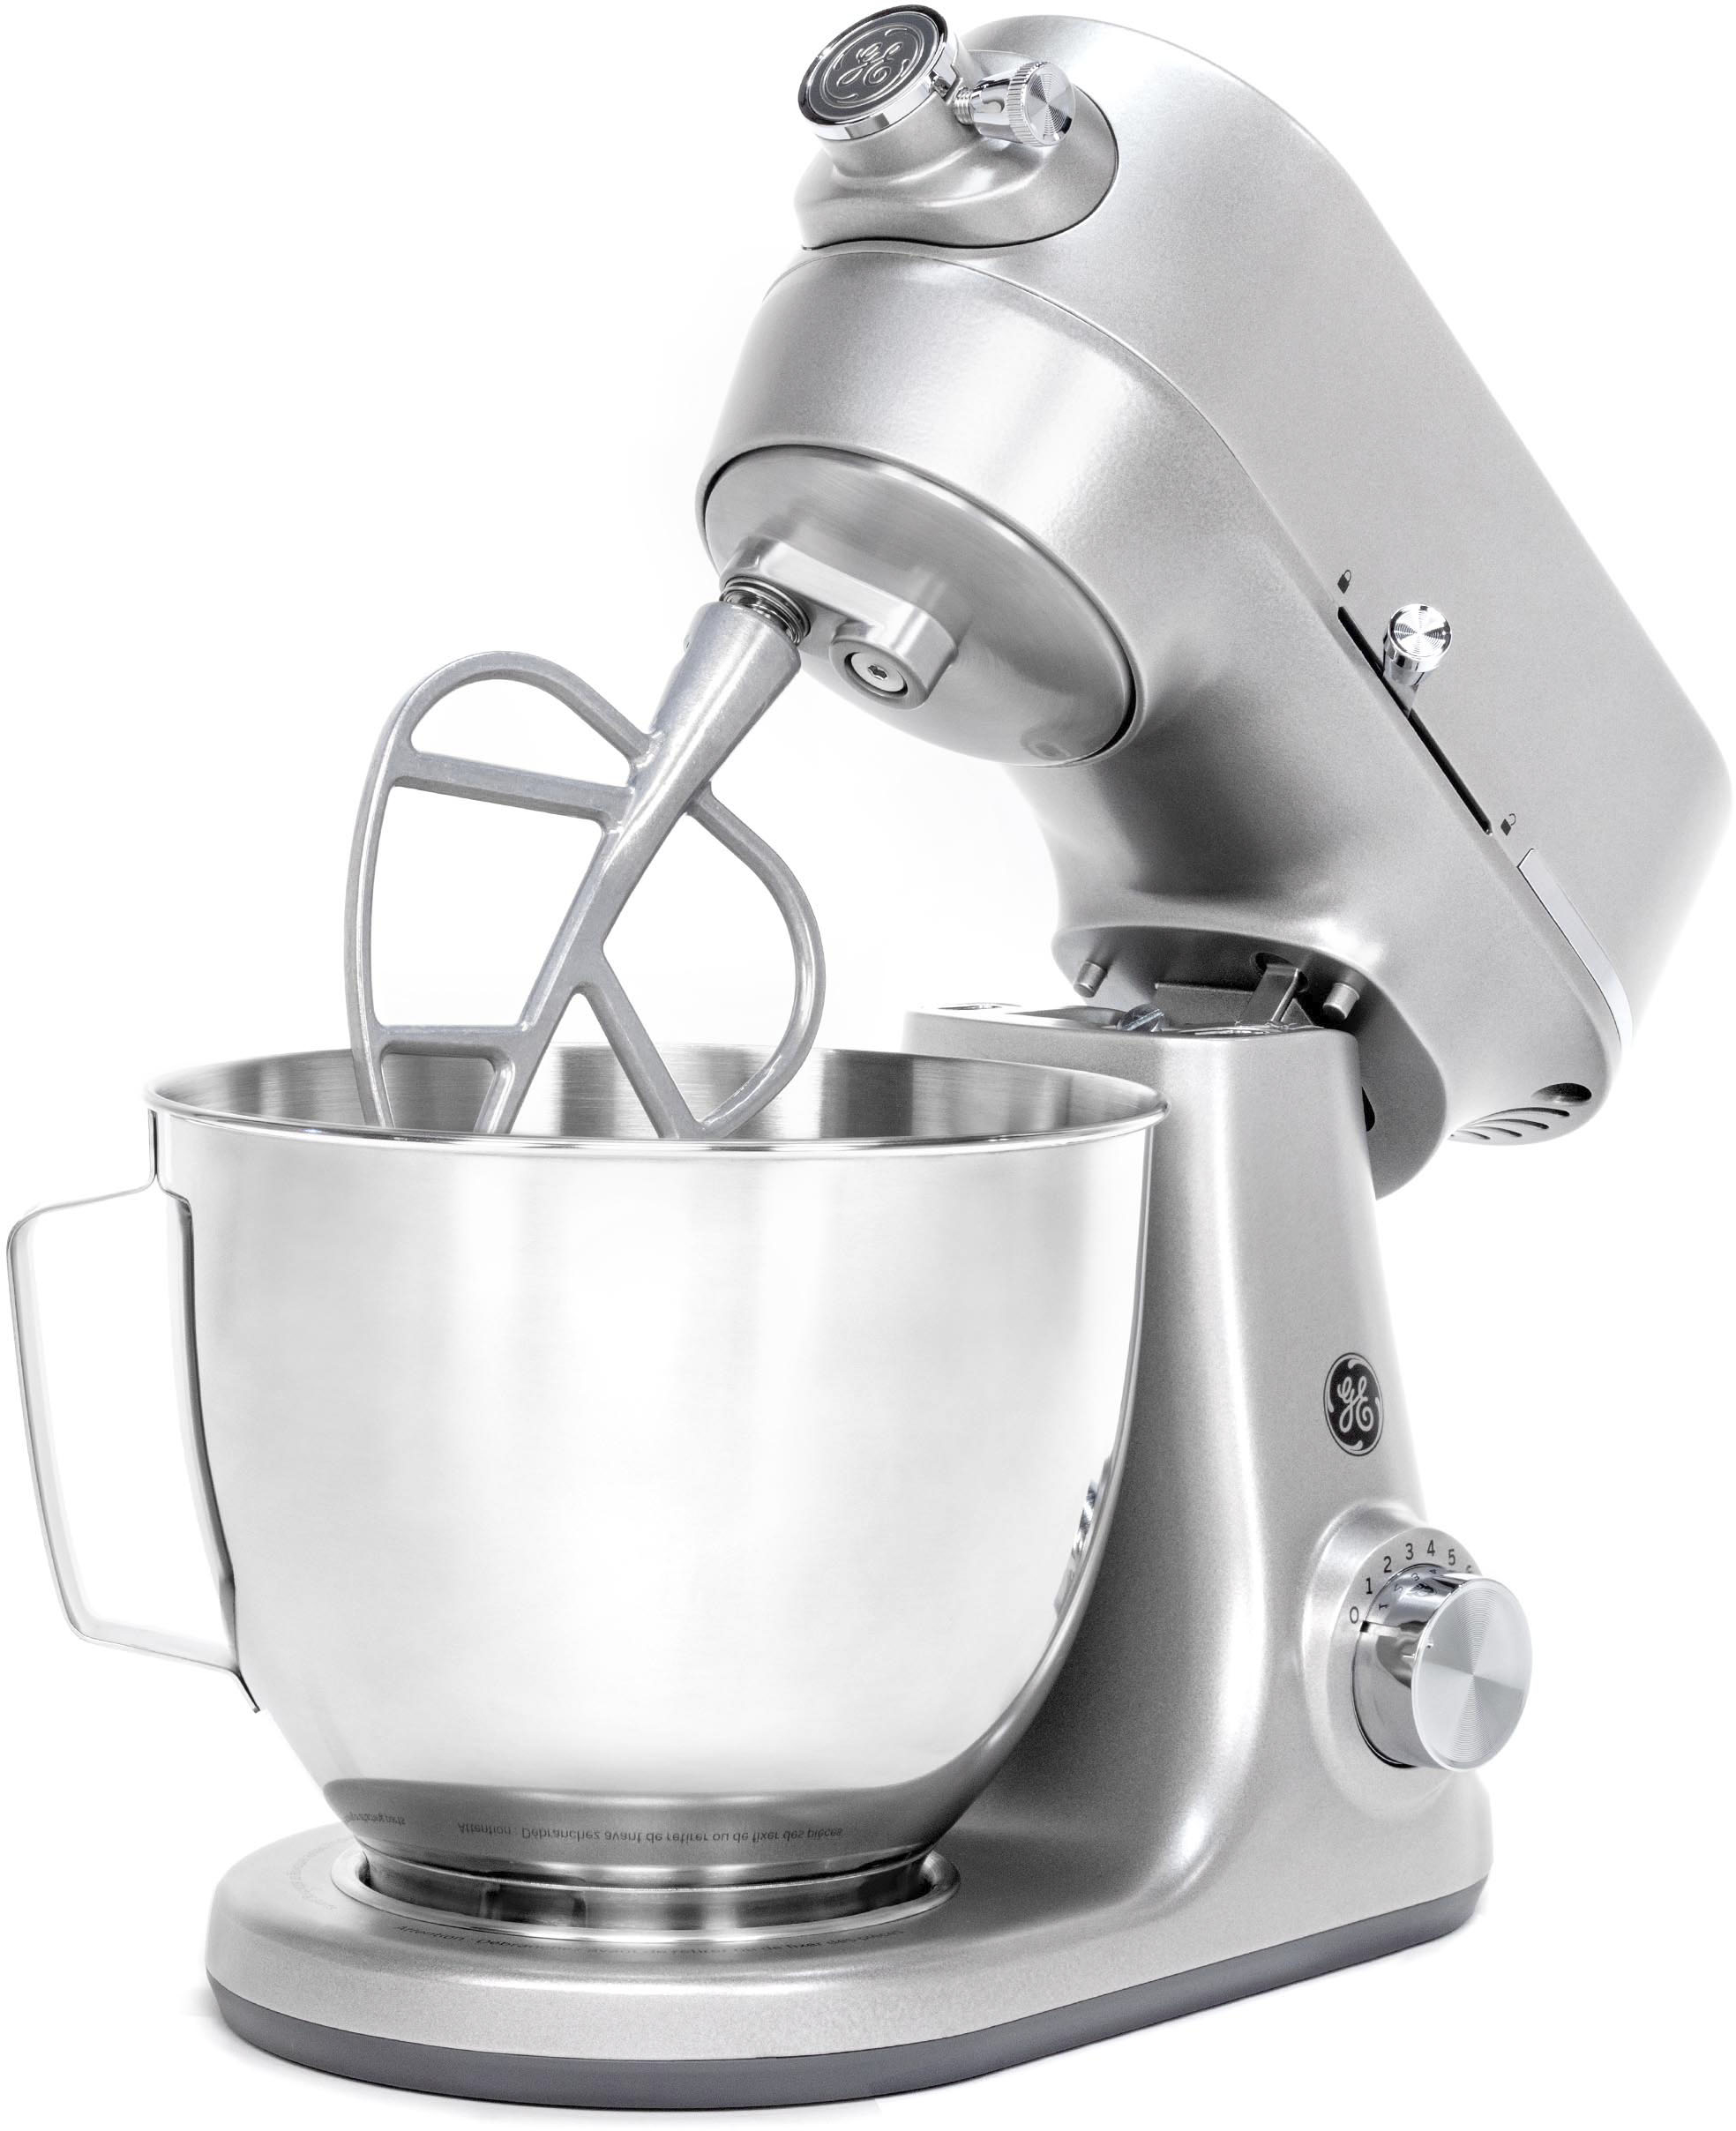 Granite Gray  GE Stand Mixer: Everything You Need, Nothing You Don't 